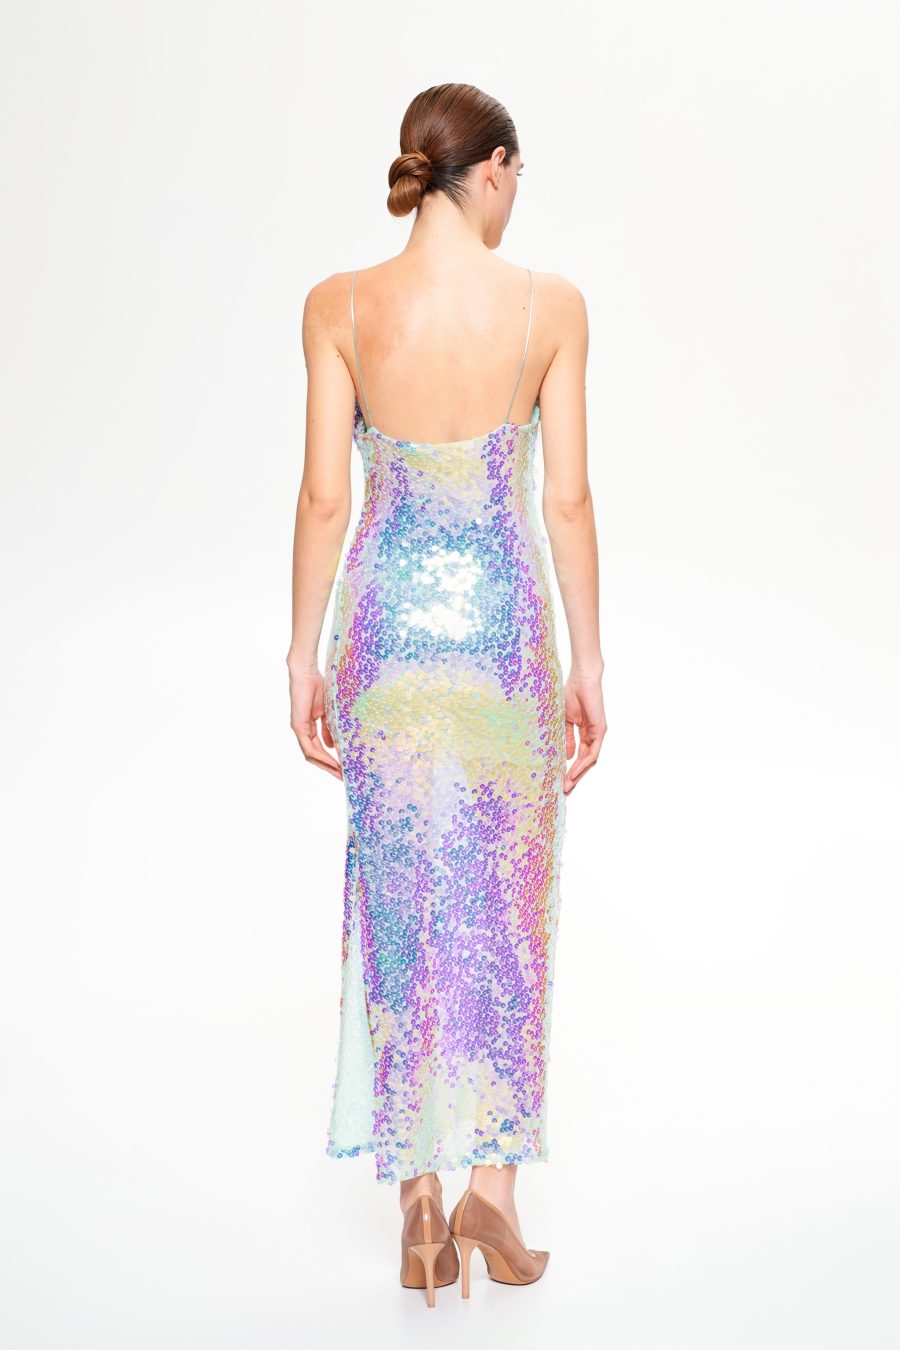 dress-with-sequins (2)